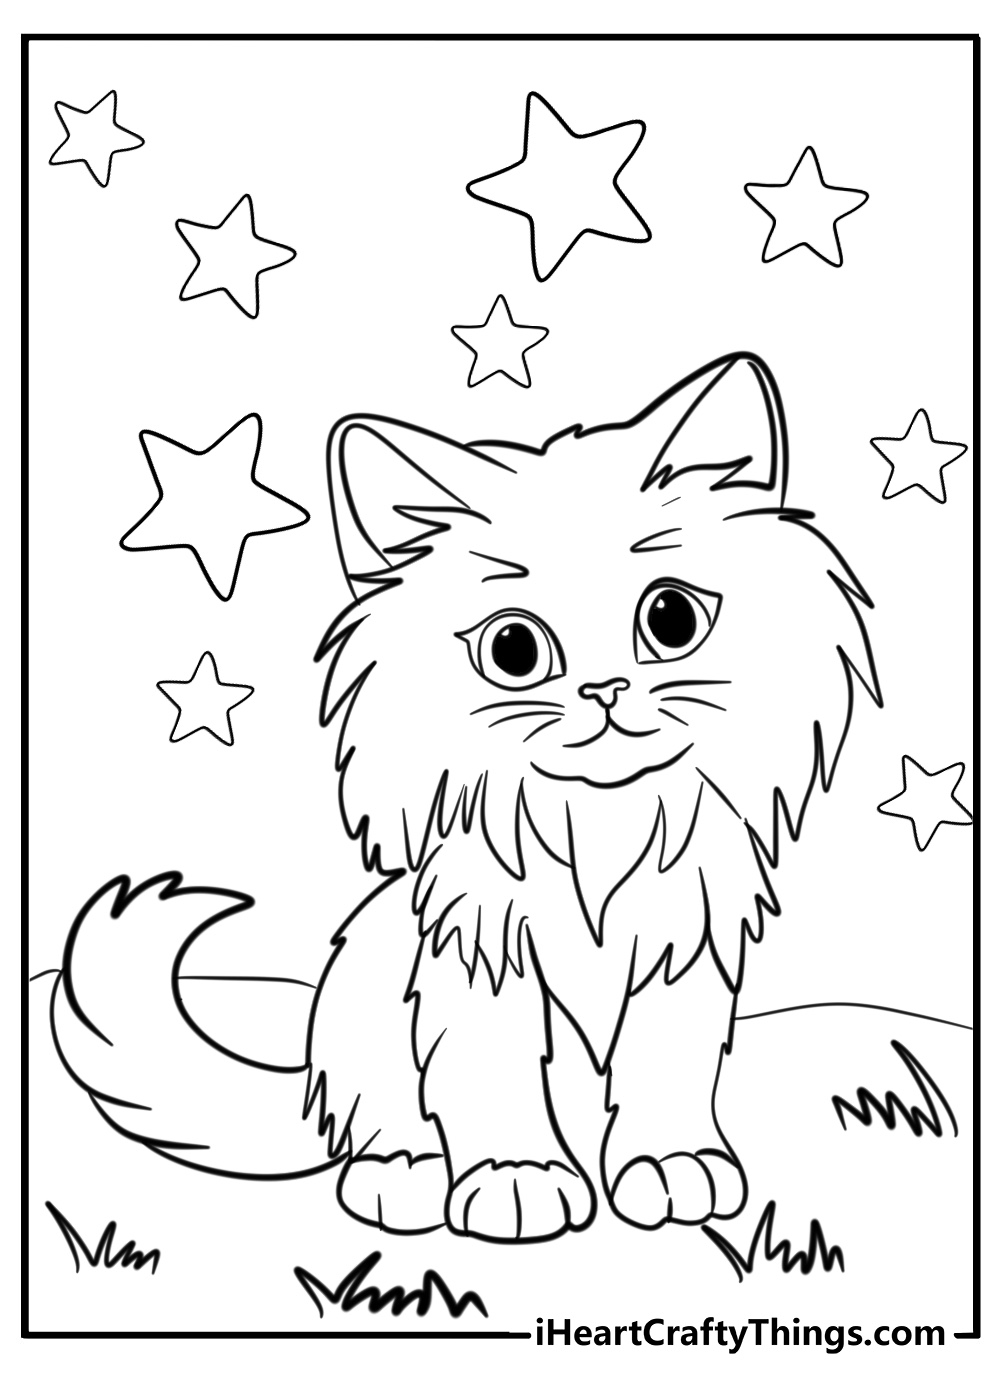 Kittens coloring pages for animals